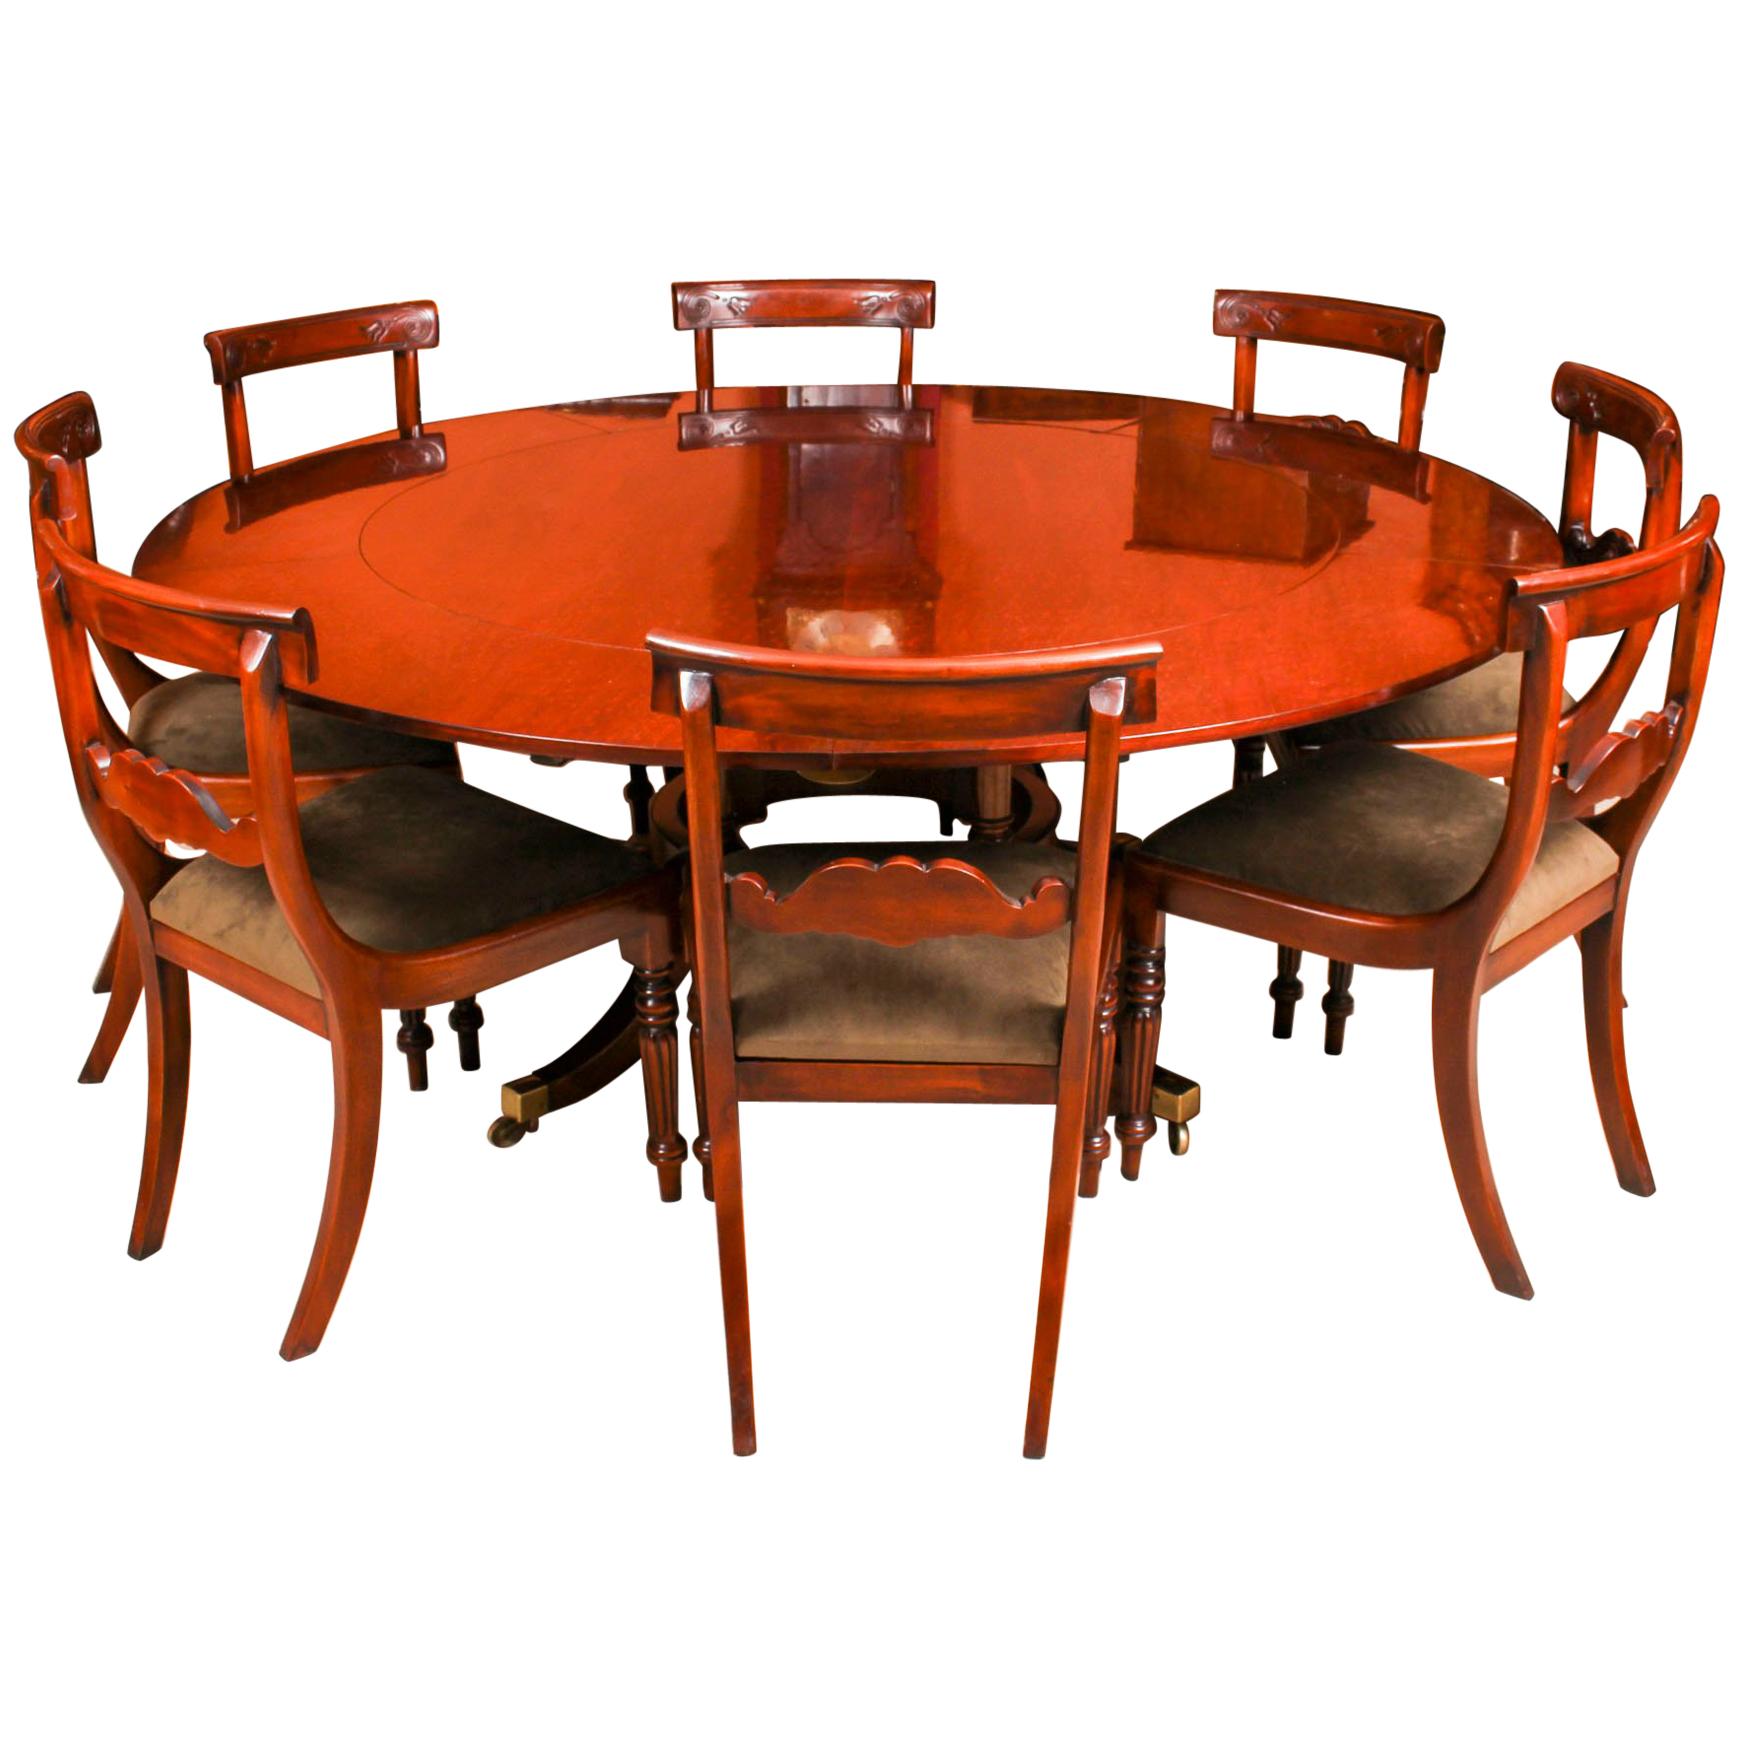 Vintage Mahogany Jupe Dining Table, Leaf Cabinet and 8 Chairs